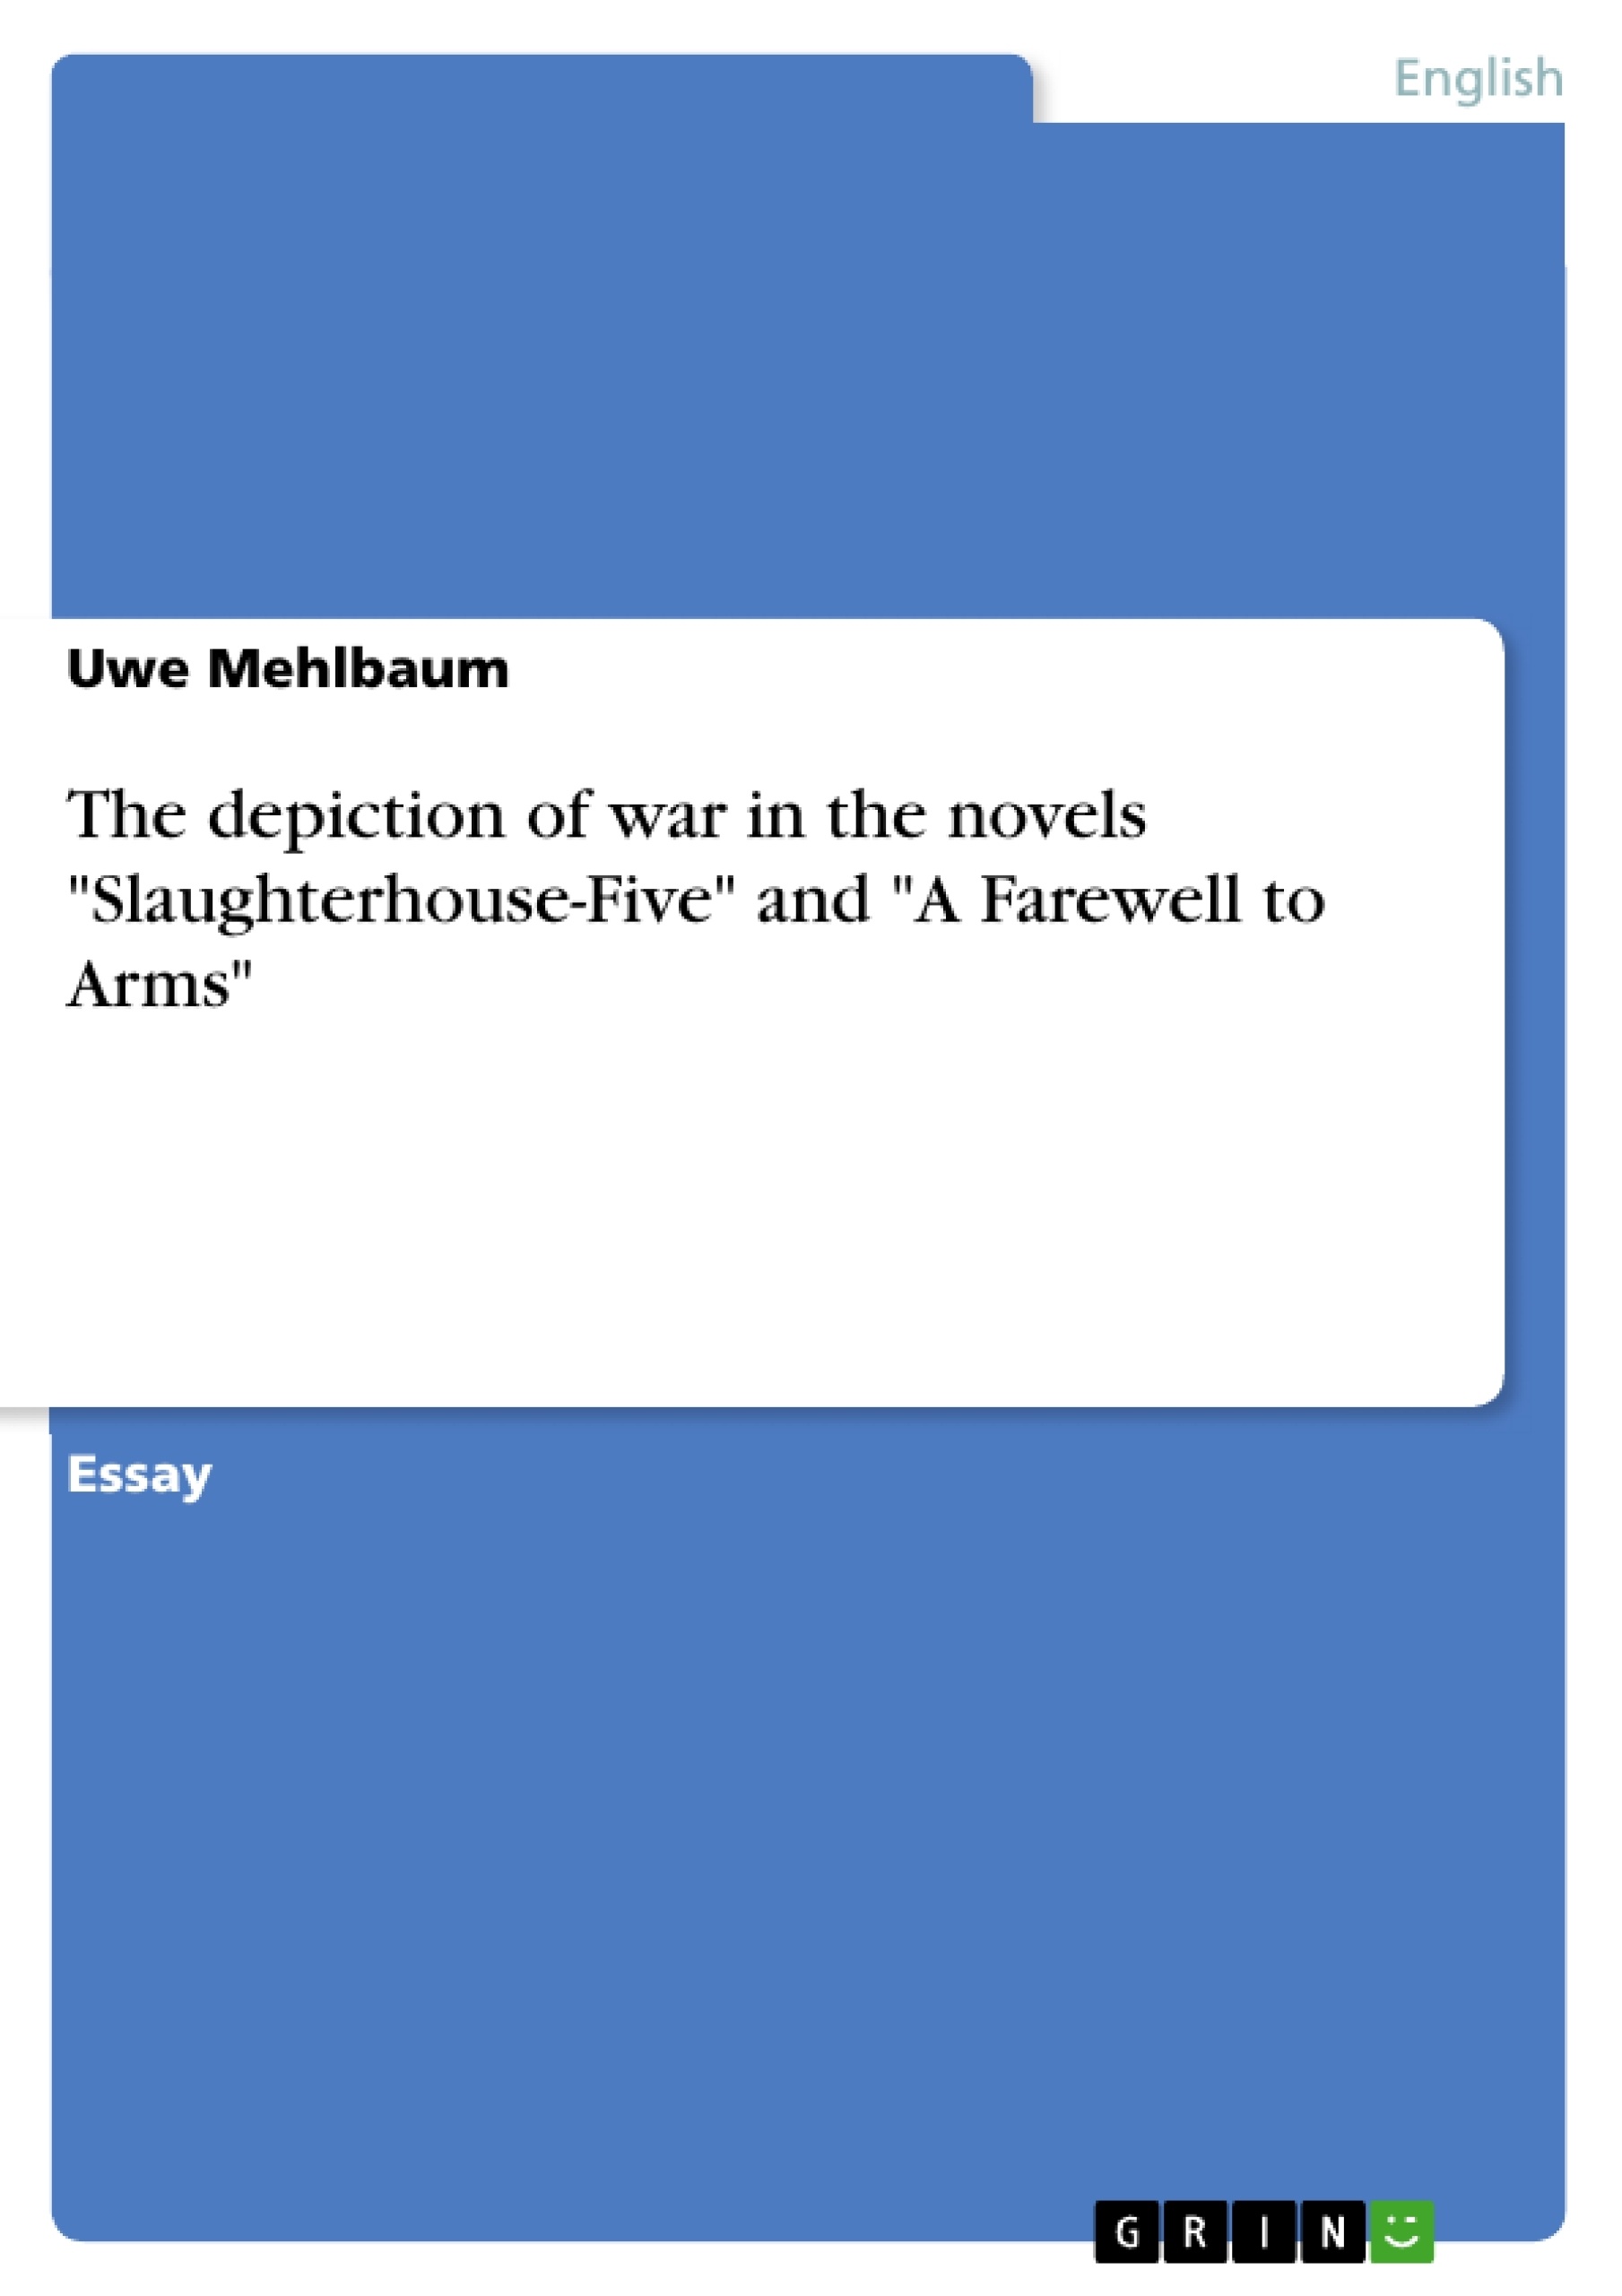 Title: The depiction of war in the novels "Slaughterhouse-Five" and "A Farewell to Arms"